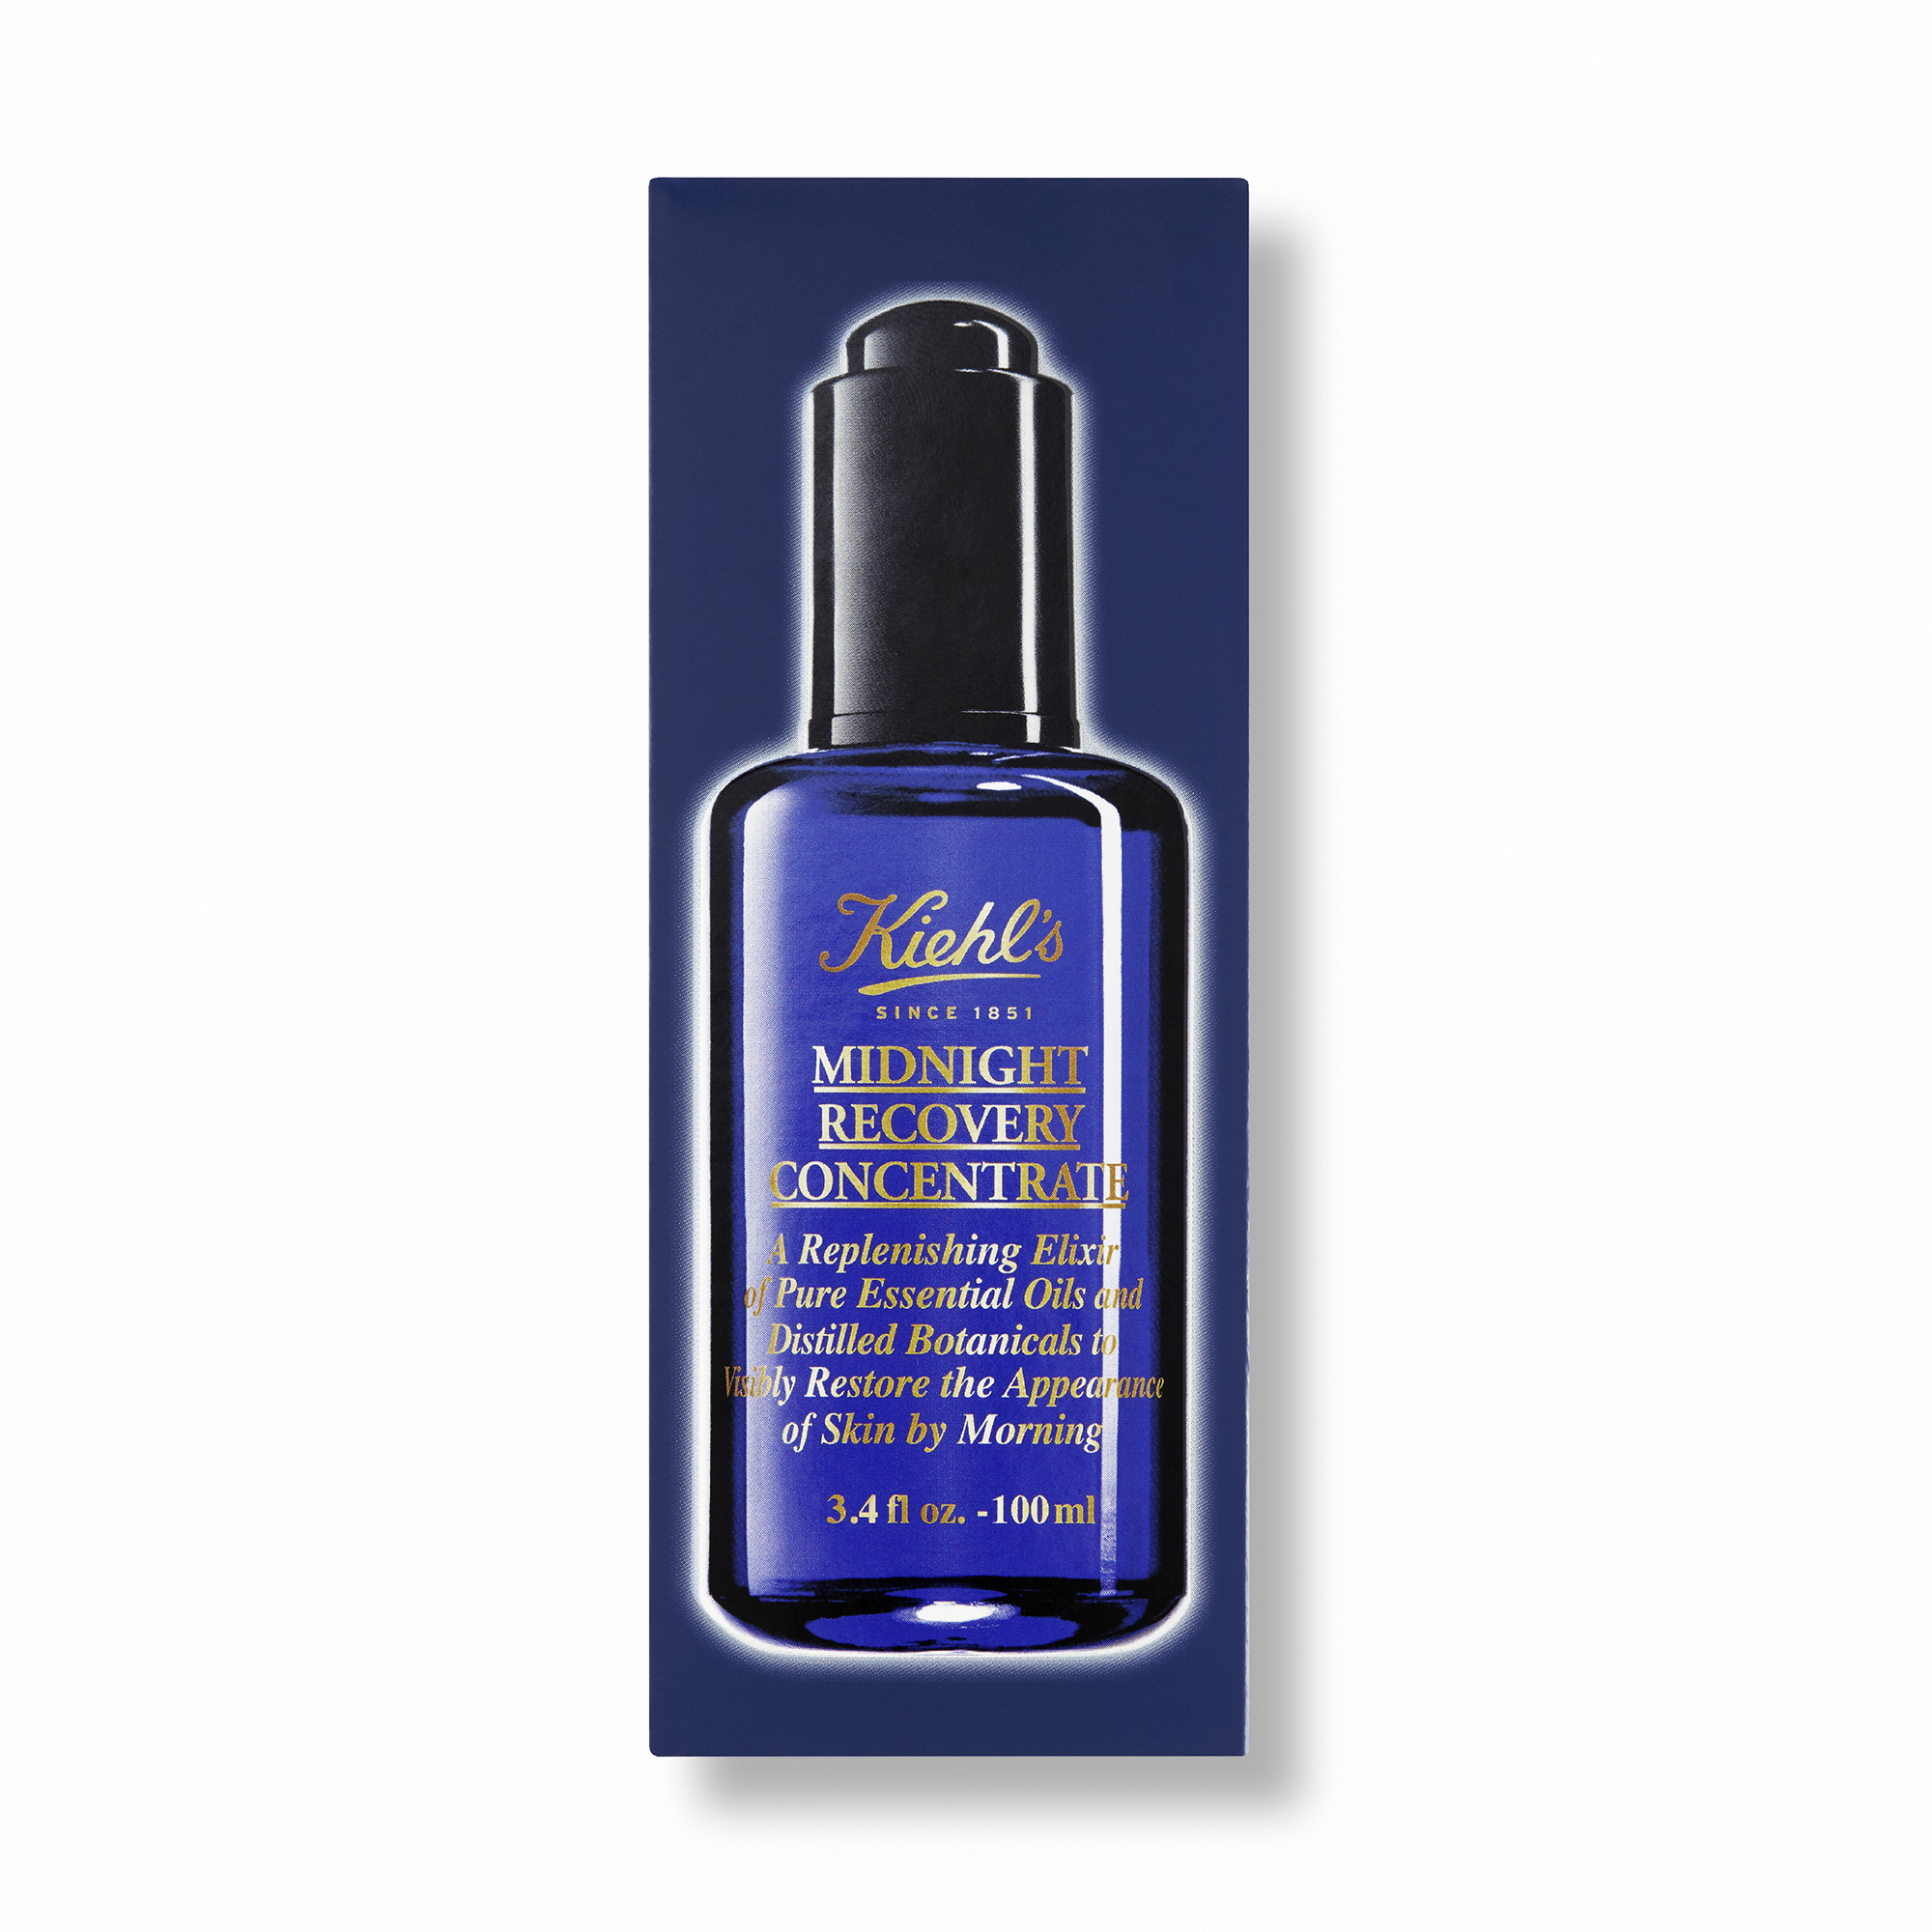 Kiehl's Midnight Recovery Concentrate Moisturizing Face Oil, 3.4